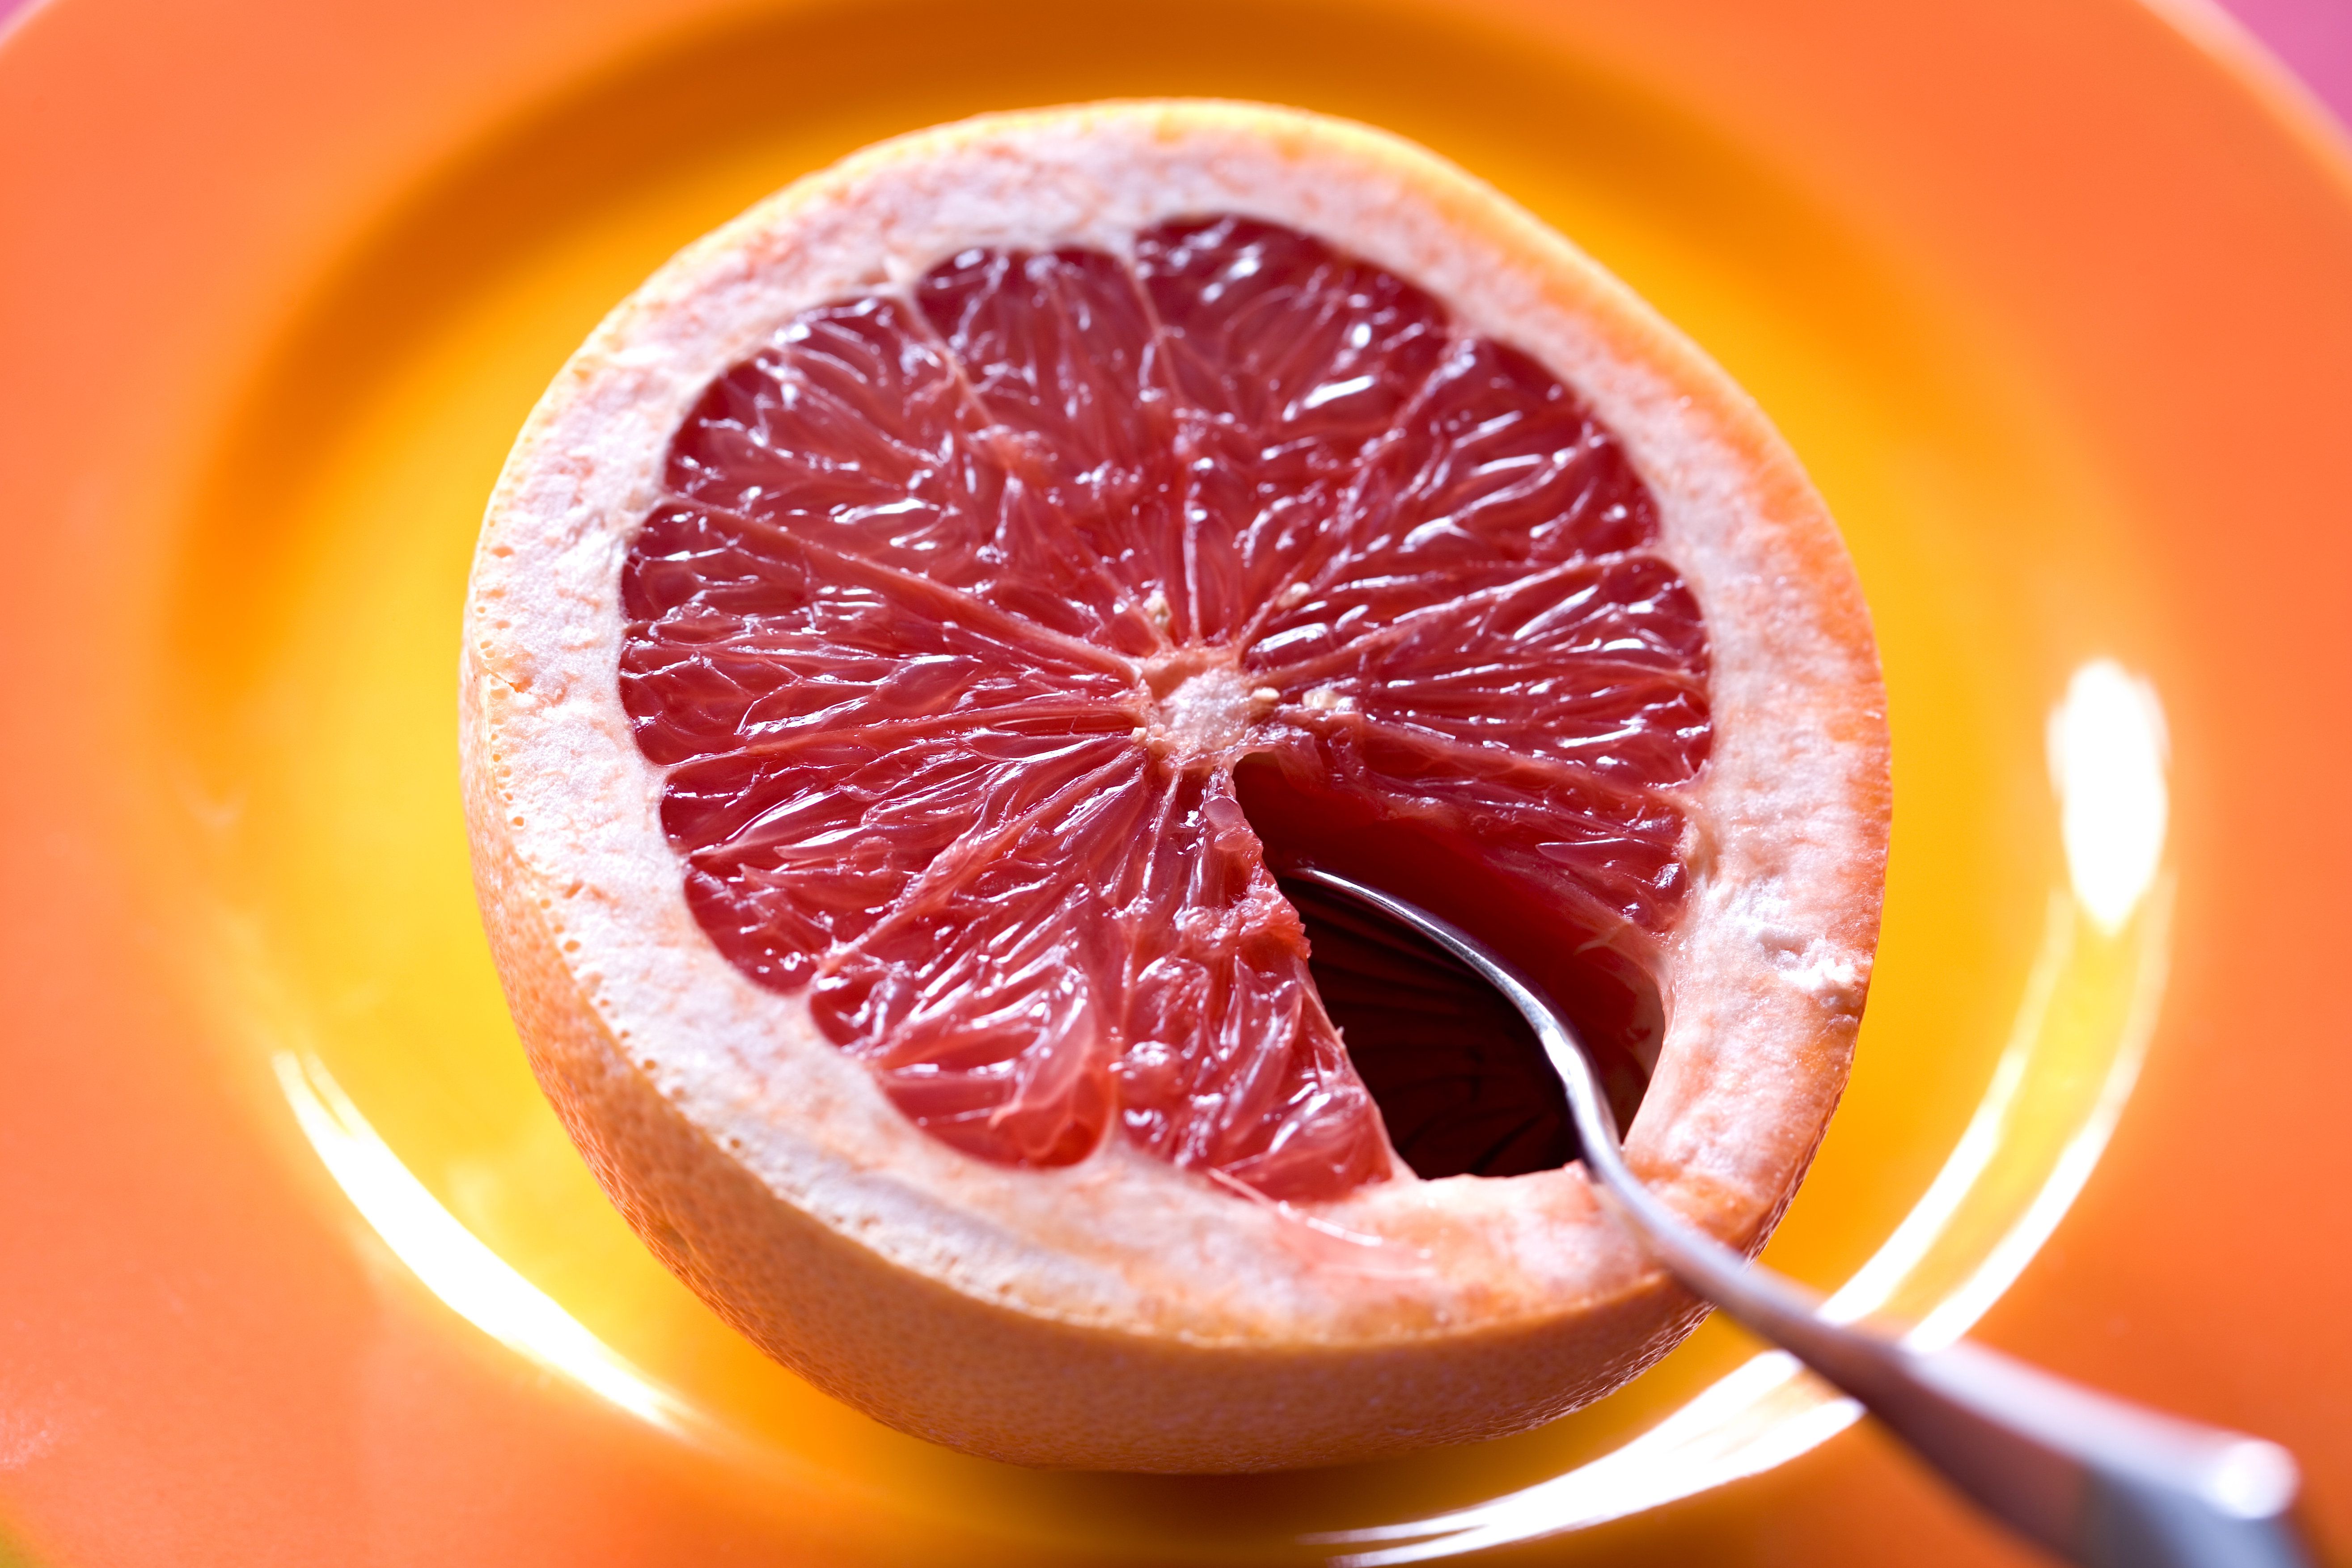 drained canned grapefruit calories